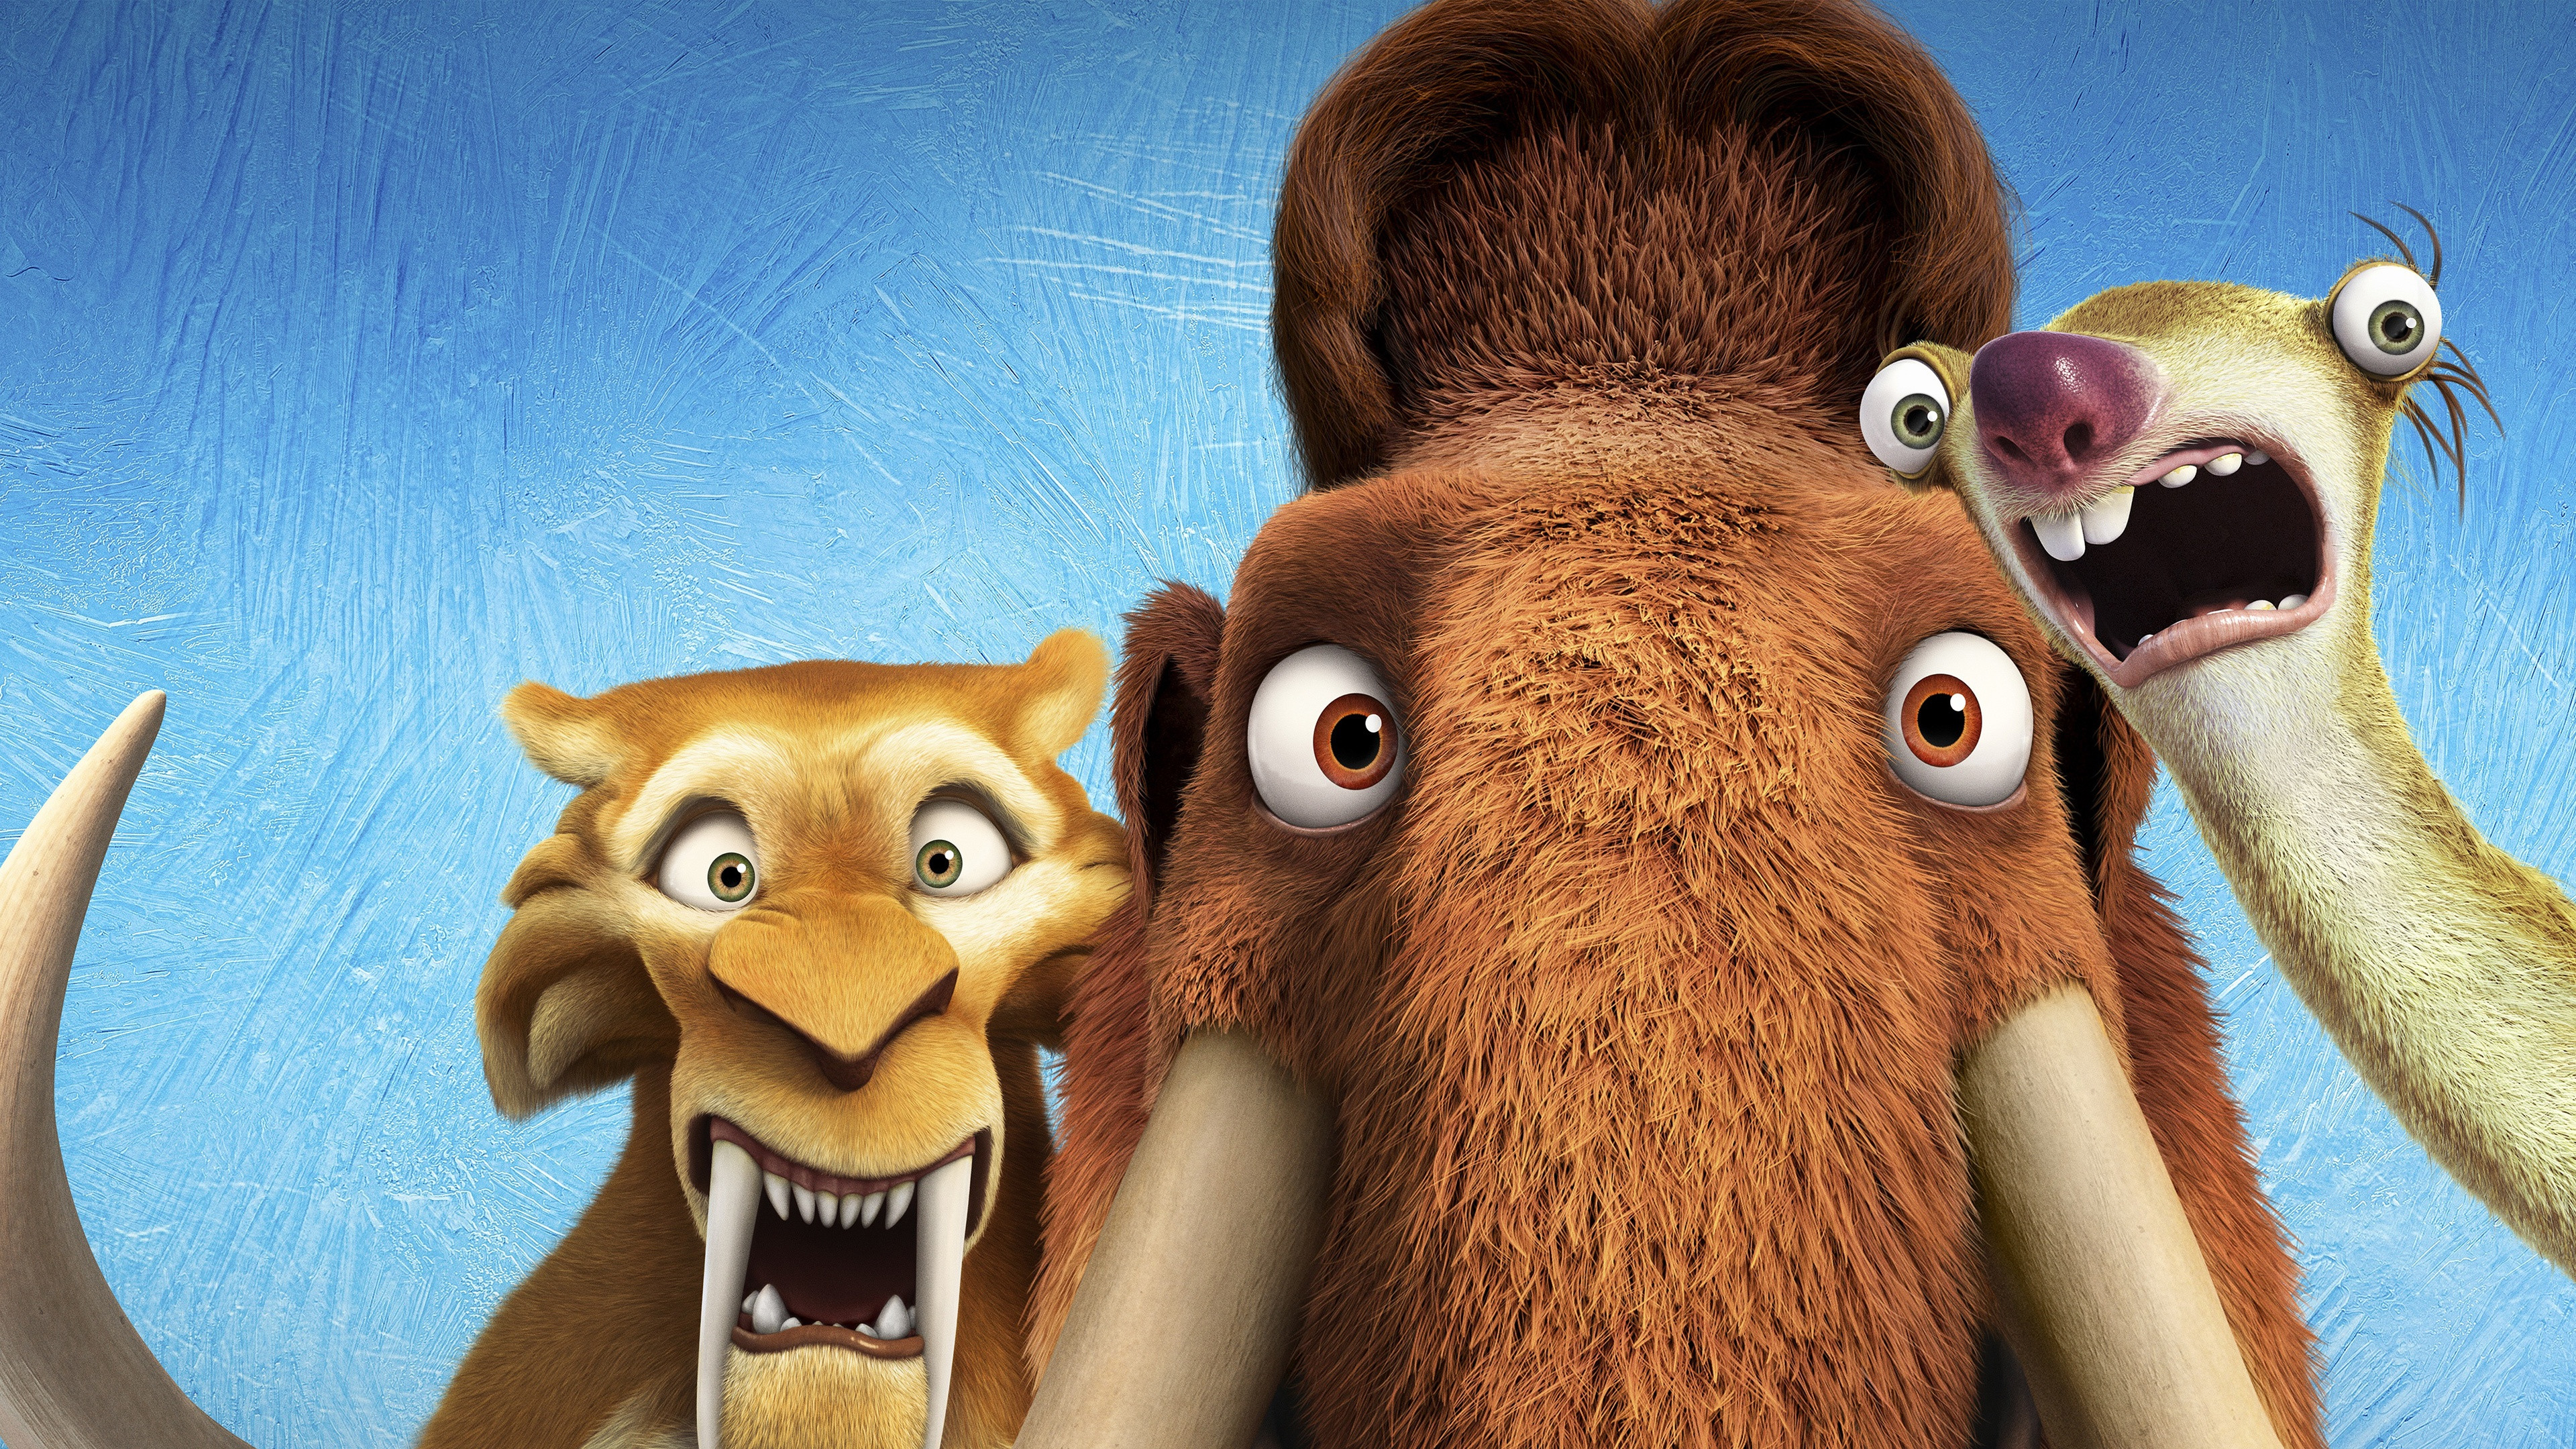 Mammoth Cartoon Ice Age Wallpaper Ice Age 5 Collision Course, Diego